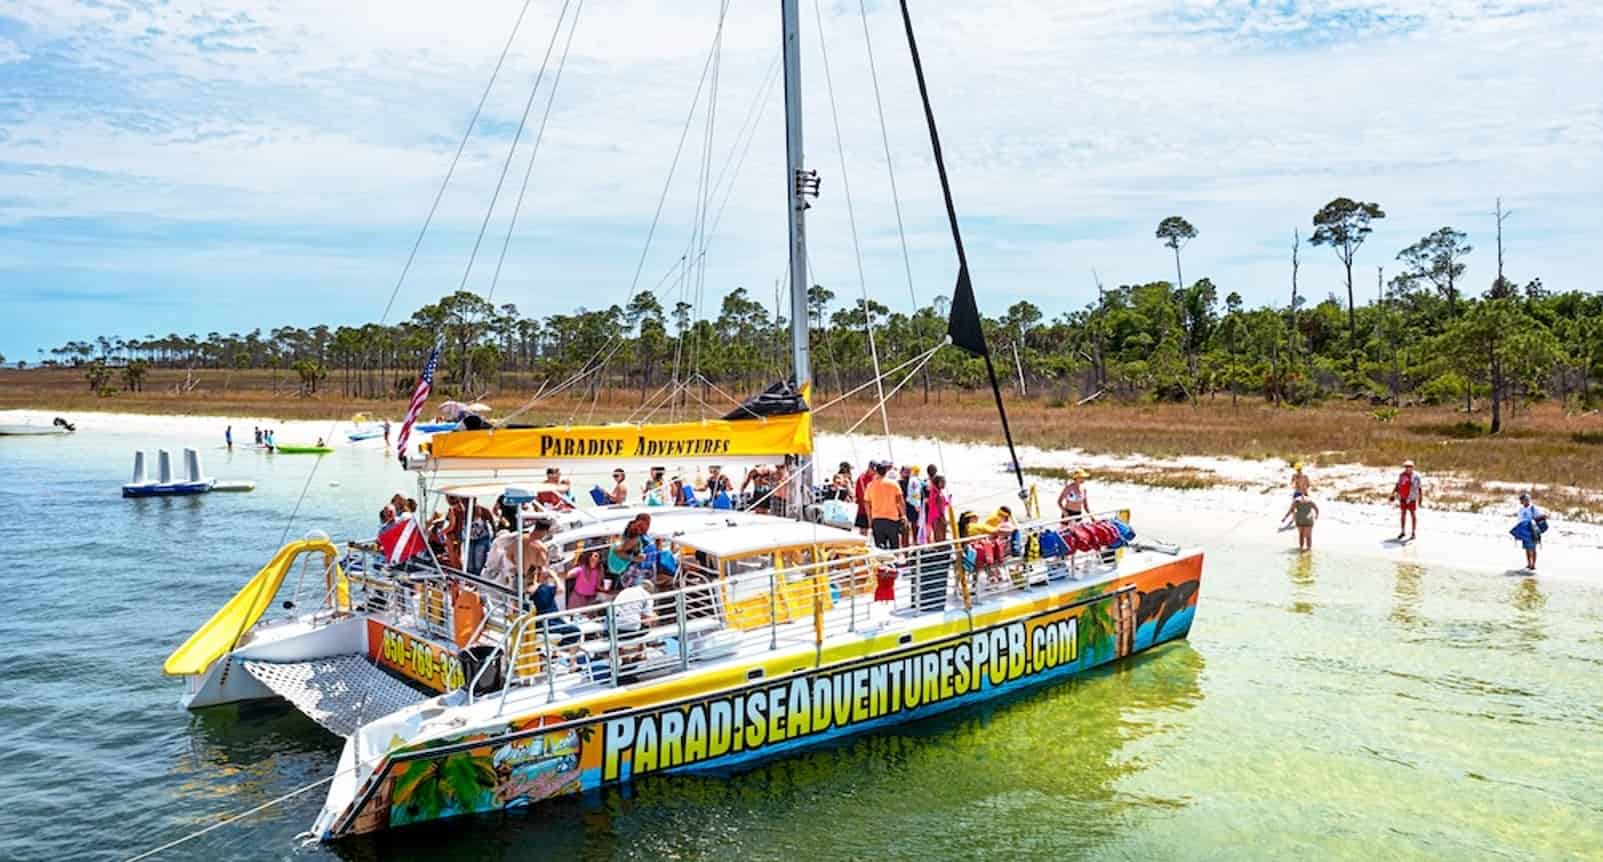 Adventure-Tour-With-Inflatable-Waterpark-Aboard-The-Privateer-Catamaran